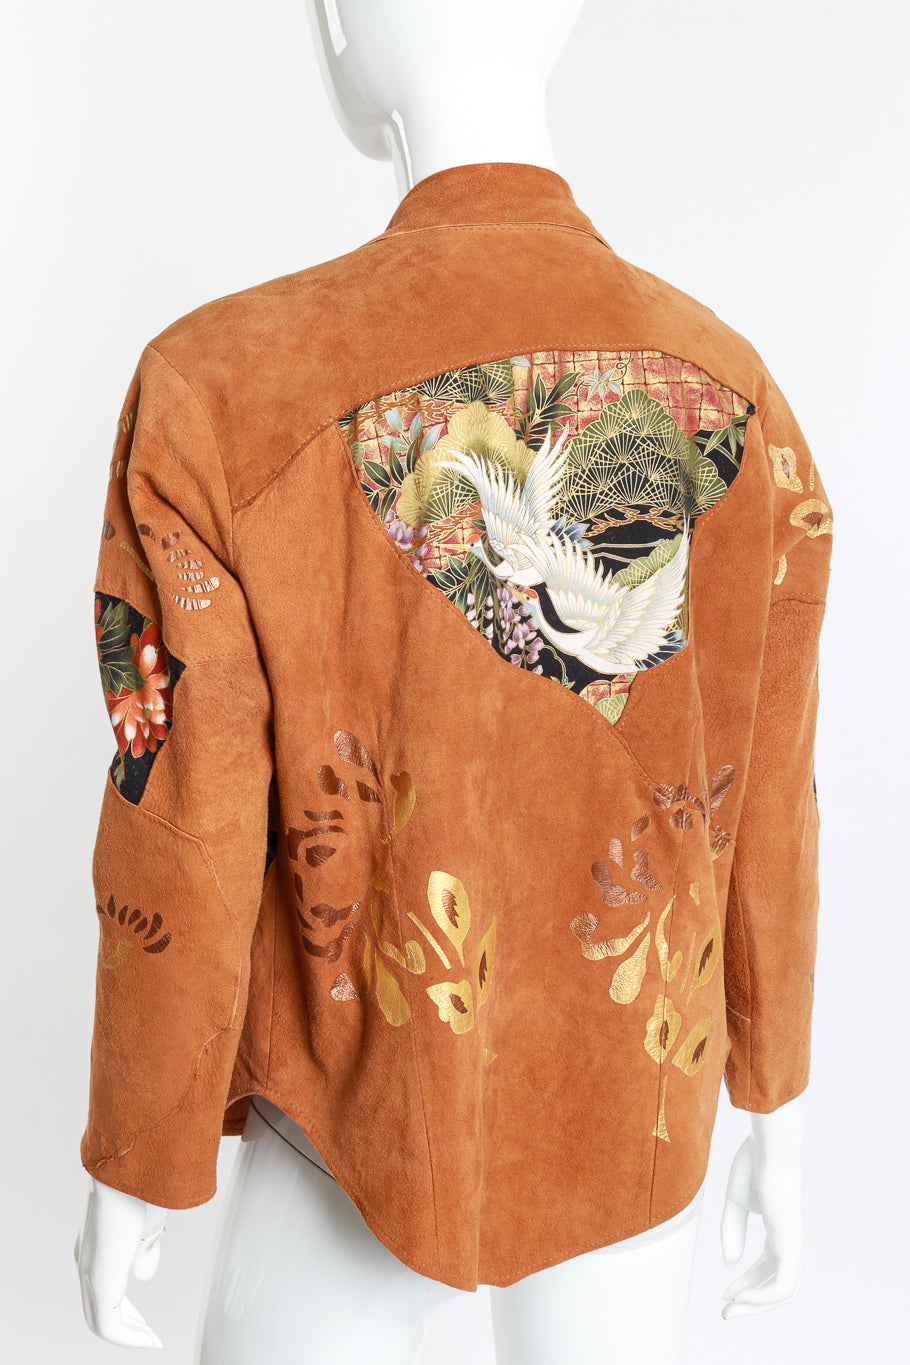 Chinoiserie Suede Jacket by Char back mannequin @RECESS LA